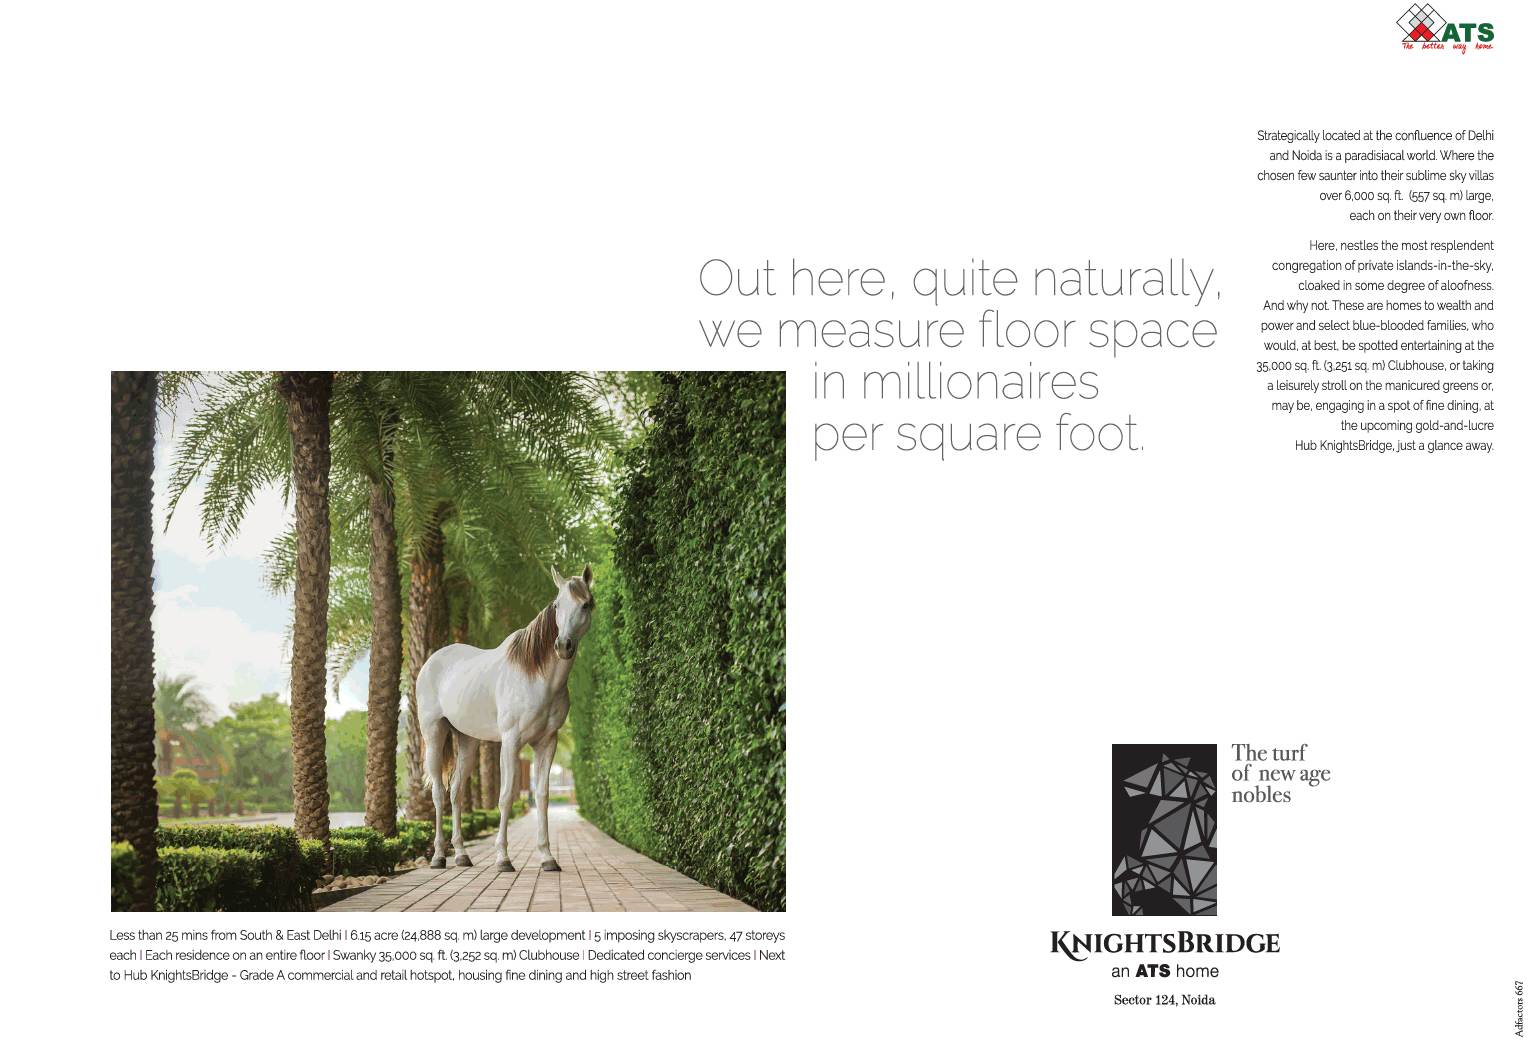 Take a leisure stroll on the manicured greens at ATS Knightsbridge in Sector 124, Noida Update